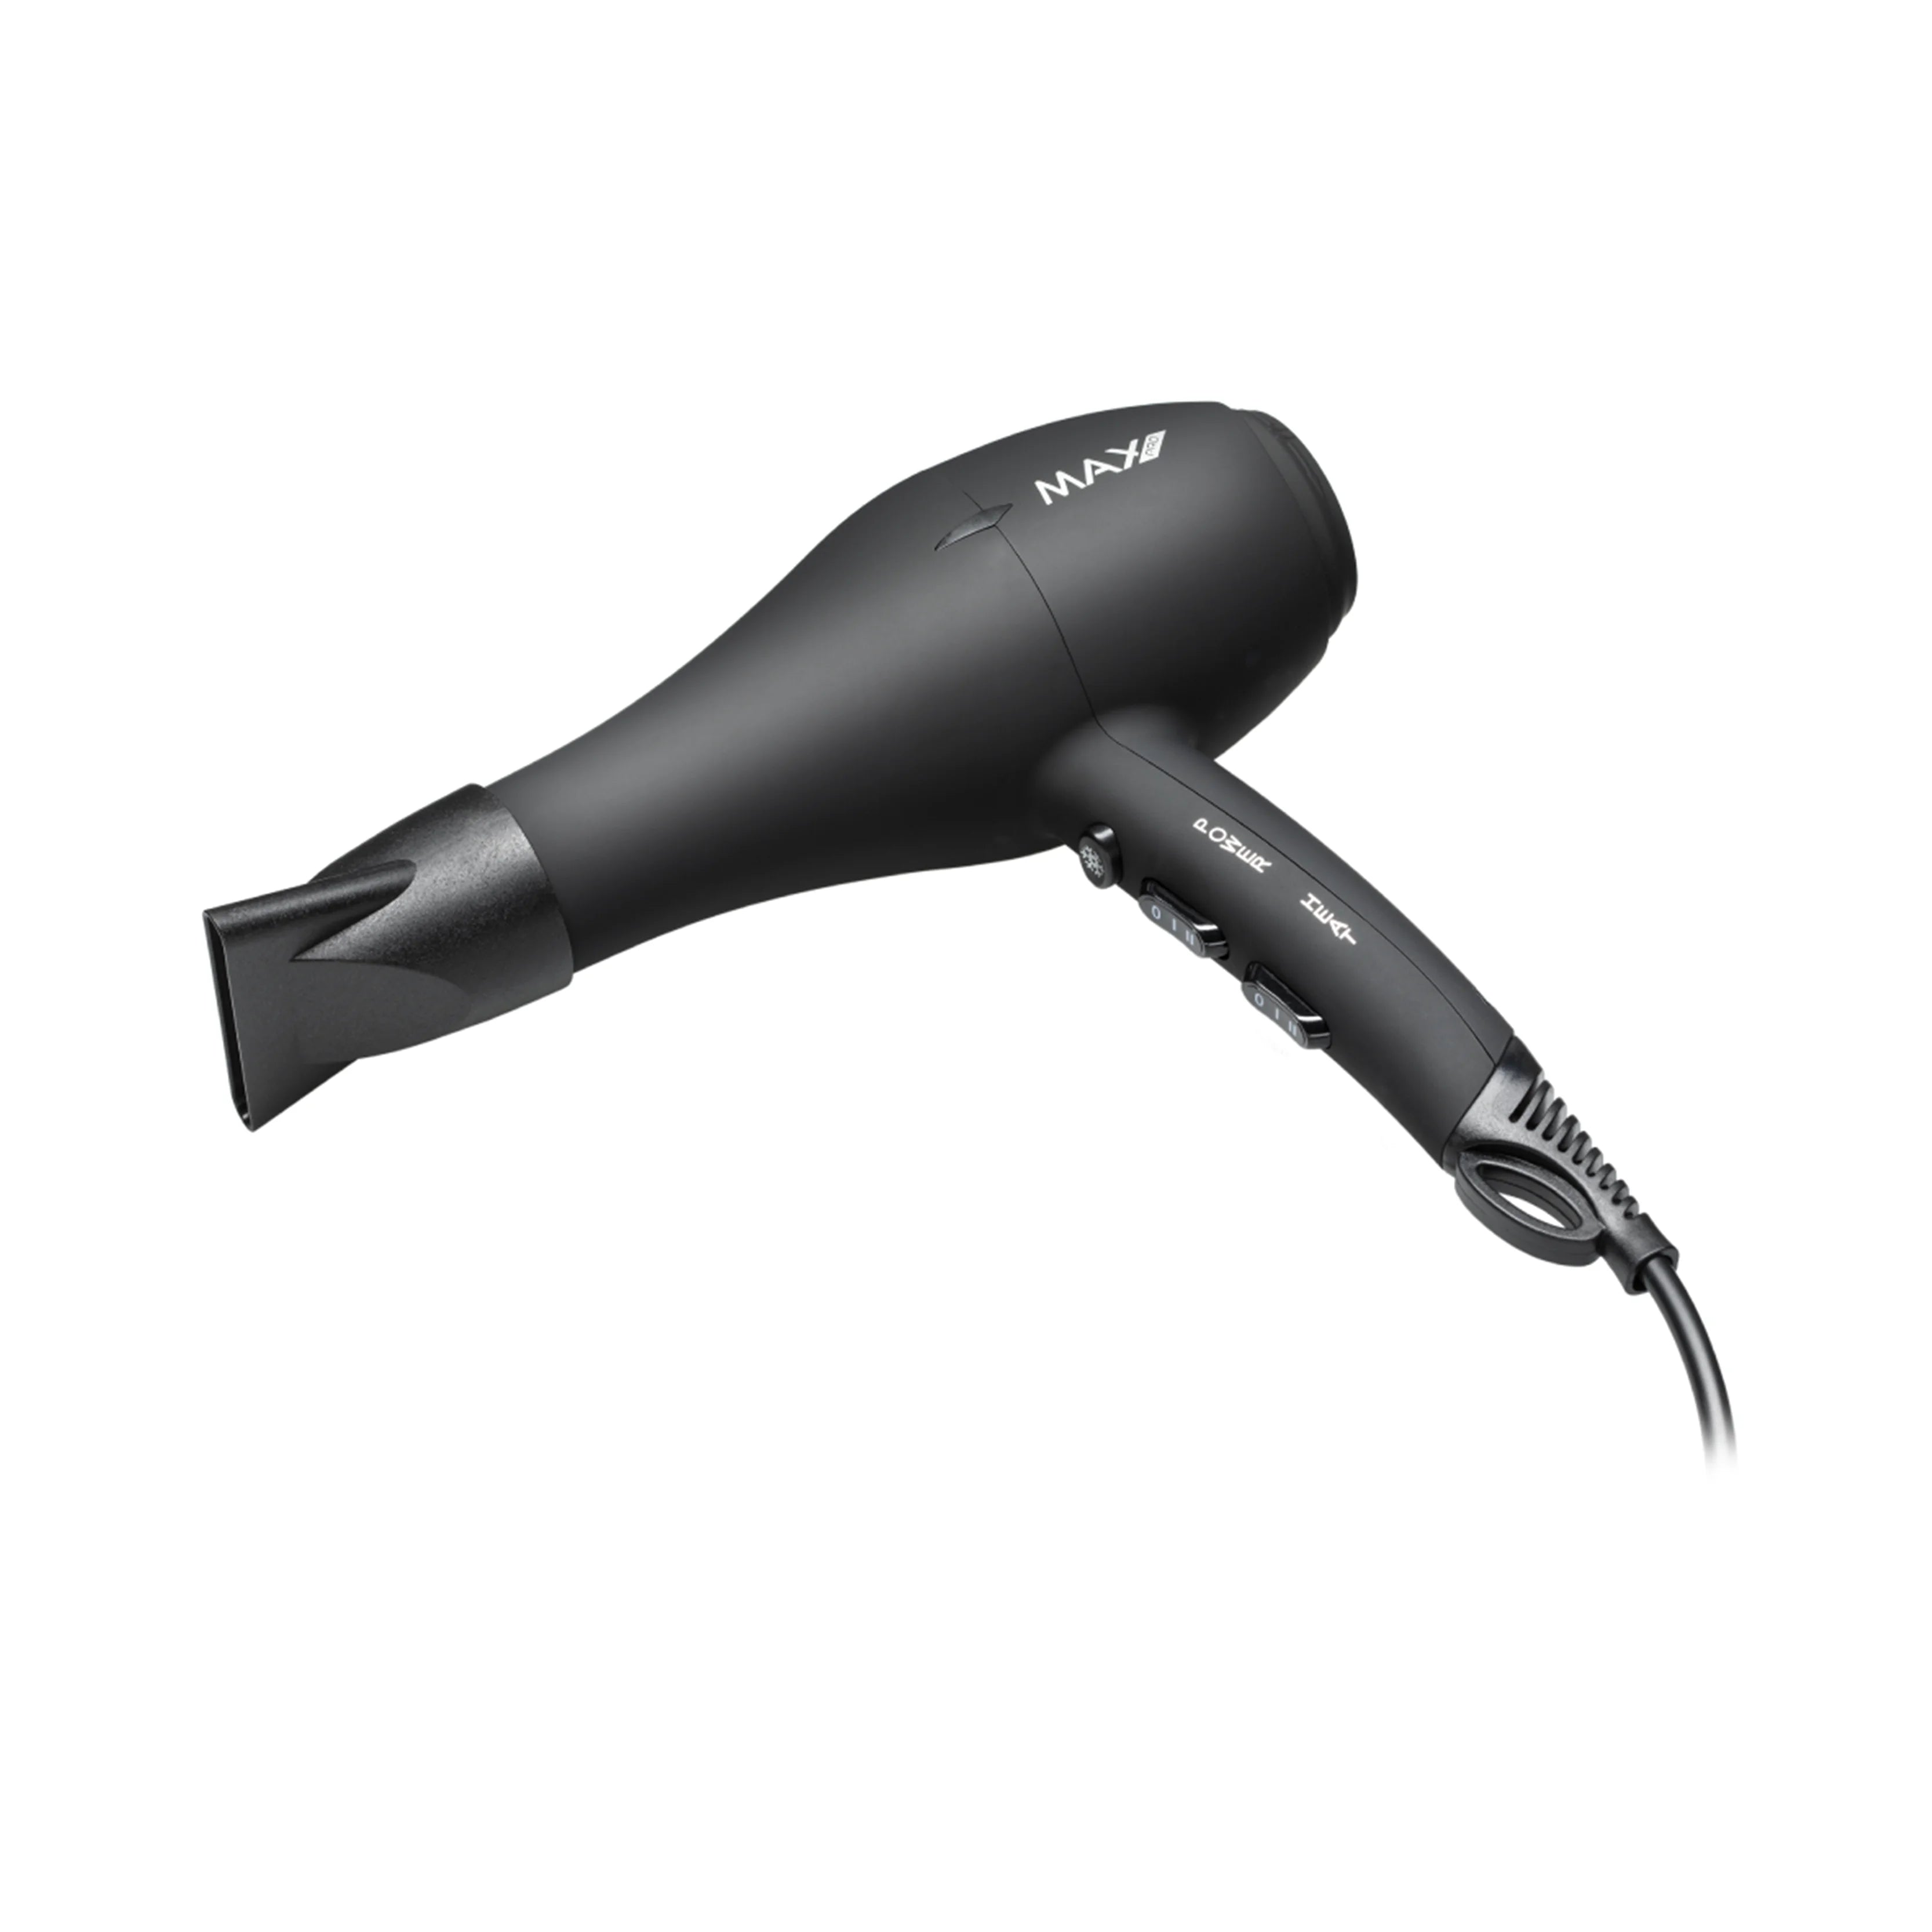 OUTLET Max Pro Xperience Hair Dryer 1600W - Max Pro x MOHI